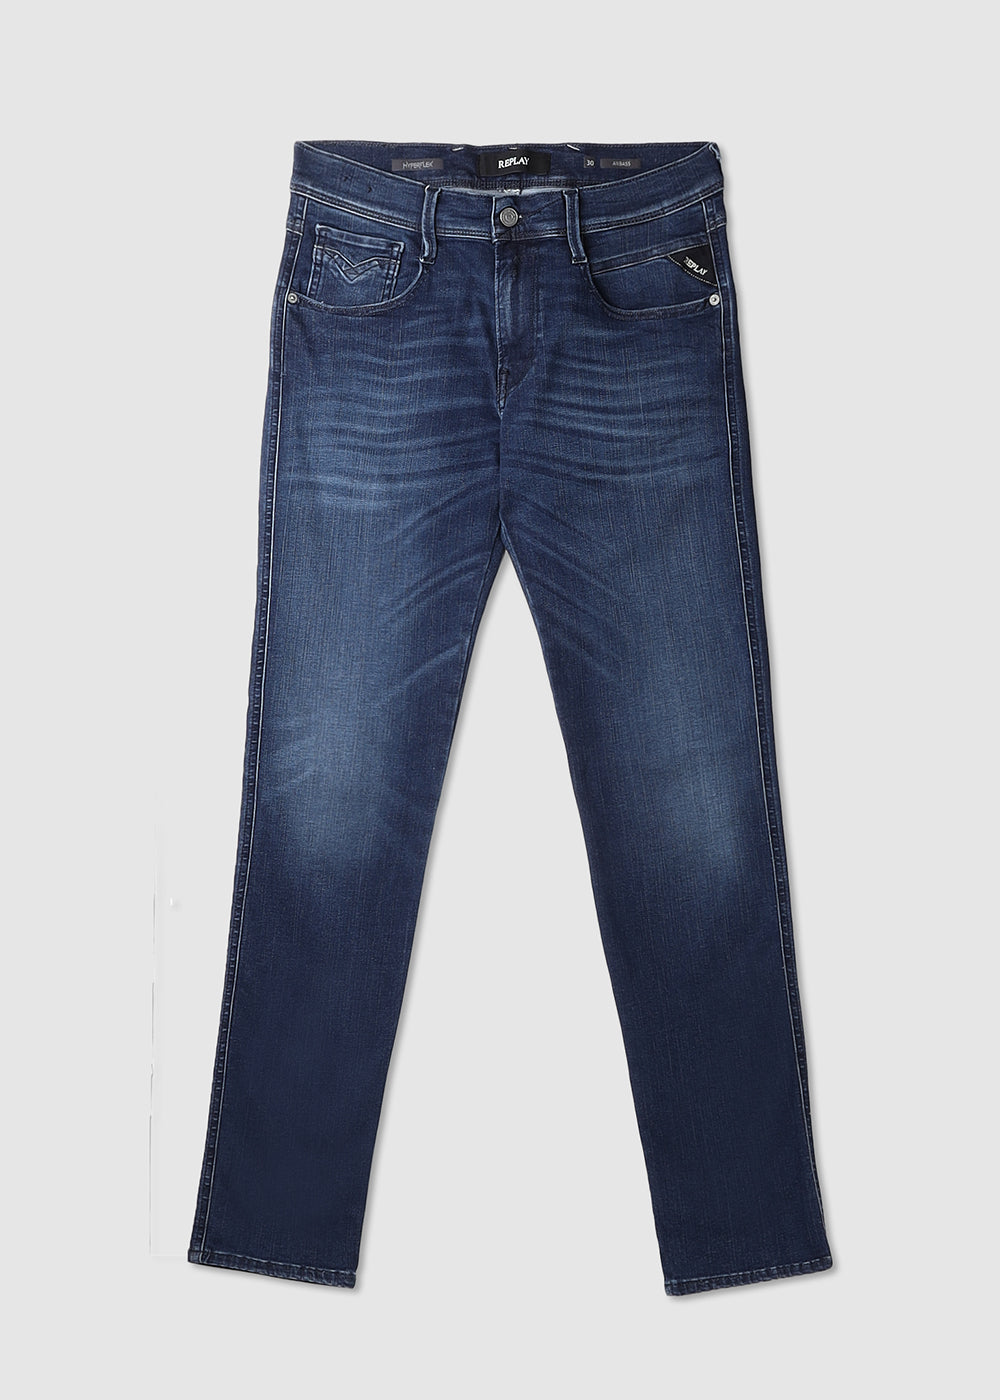 Image of Replay Mens Anbass Hyper Cloud Jeans In Dark Blue